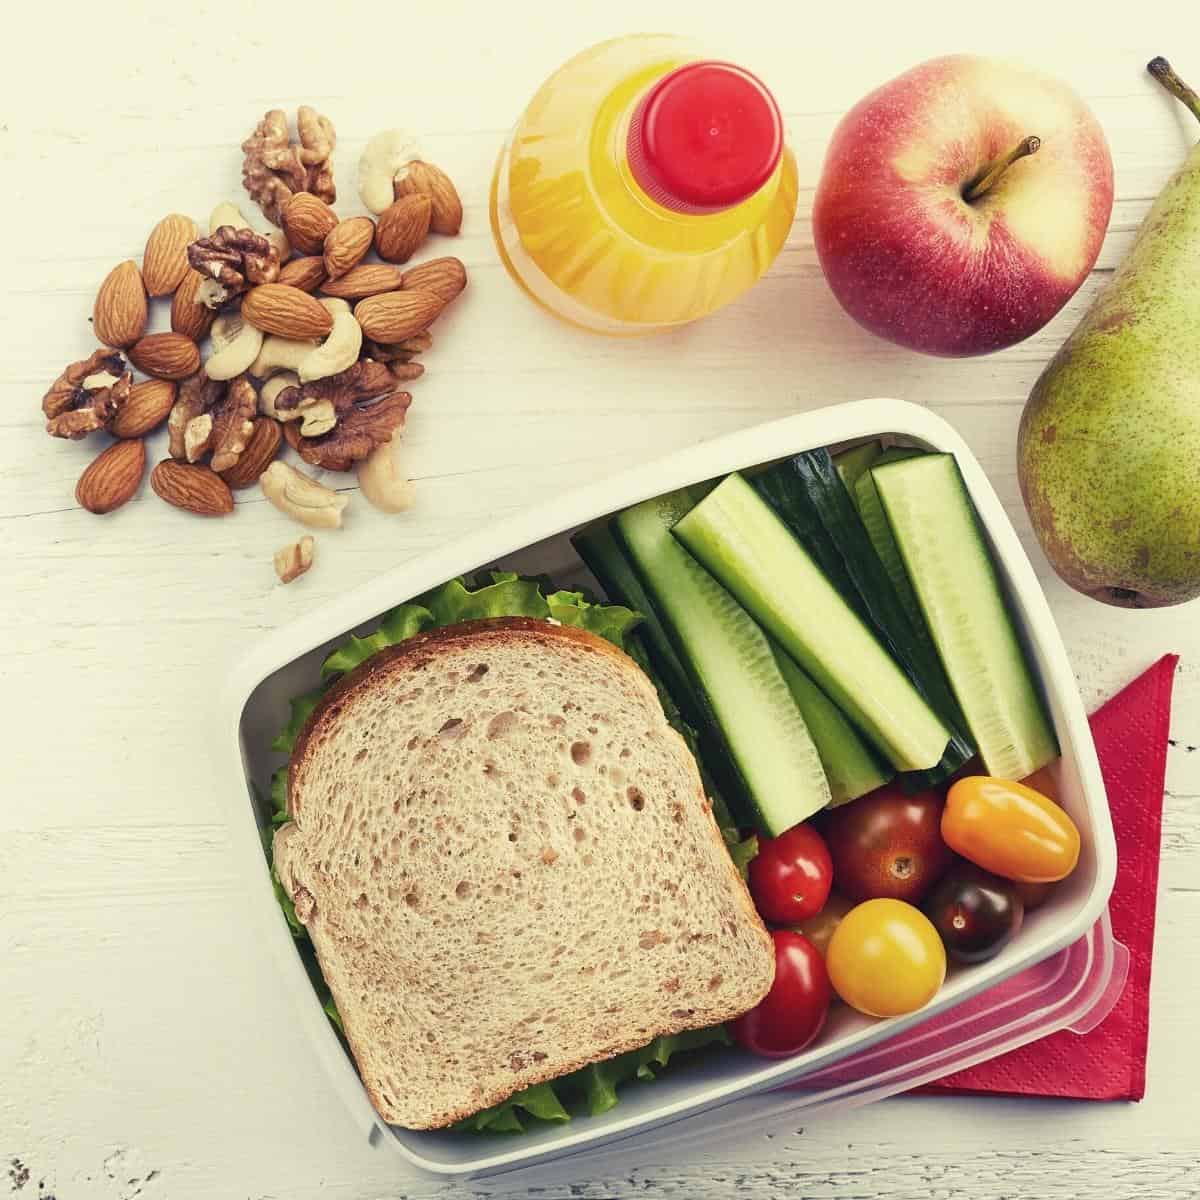 lunch box with sandwiches and fruit